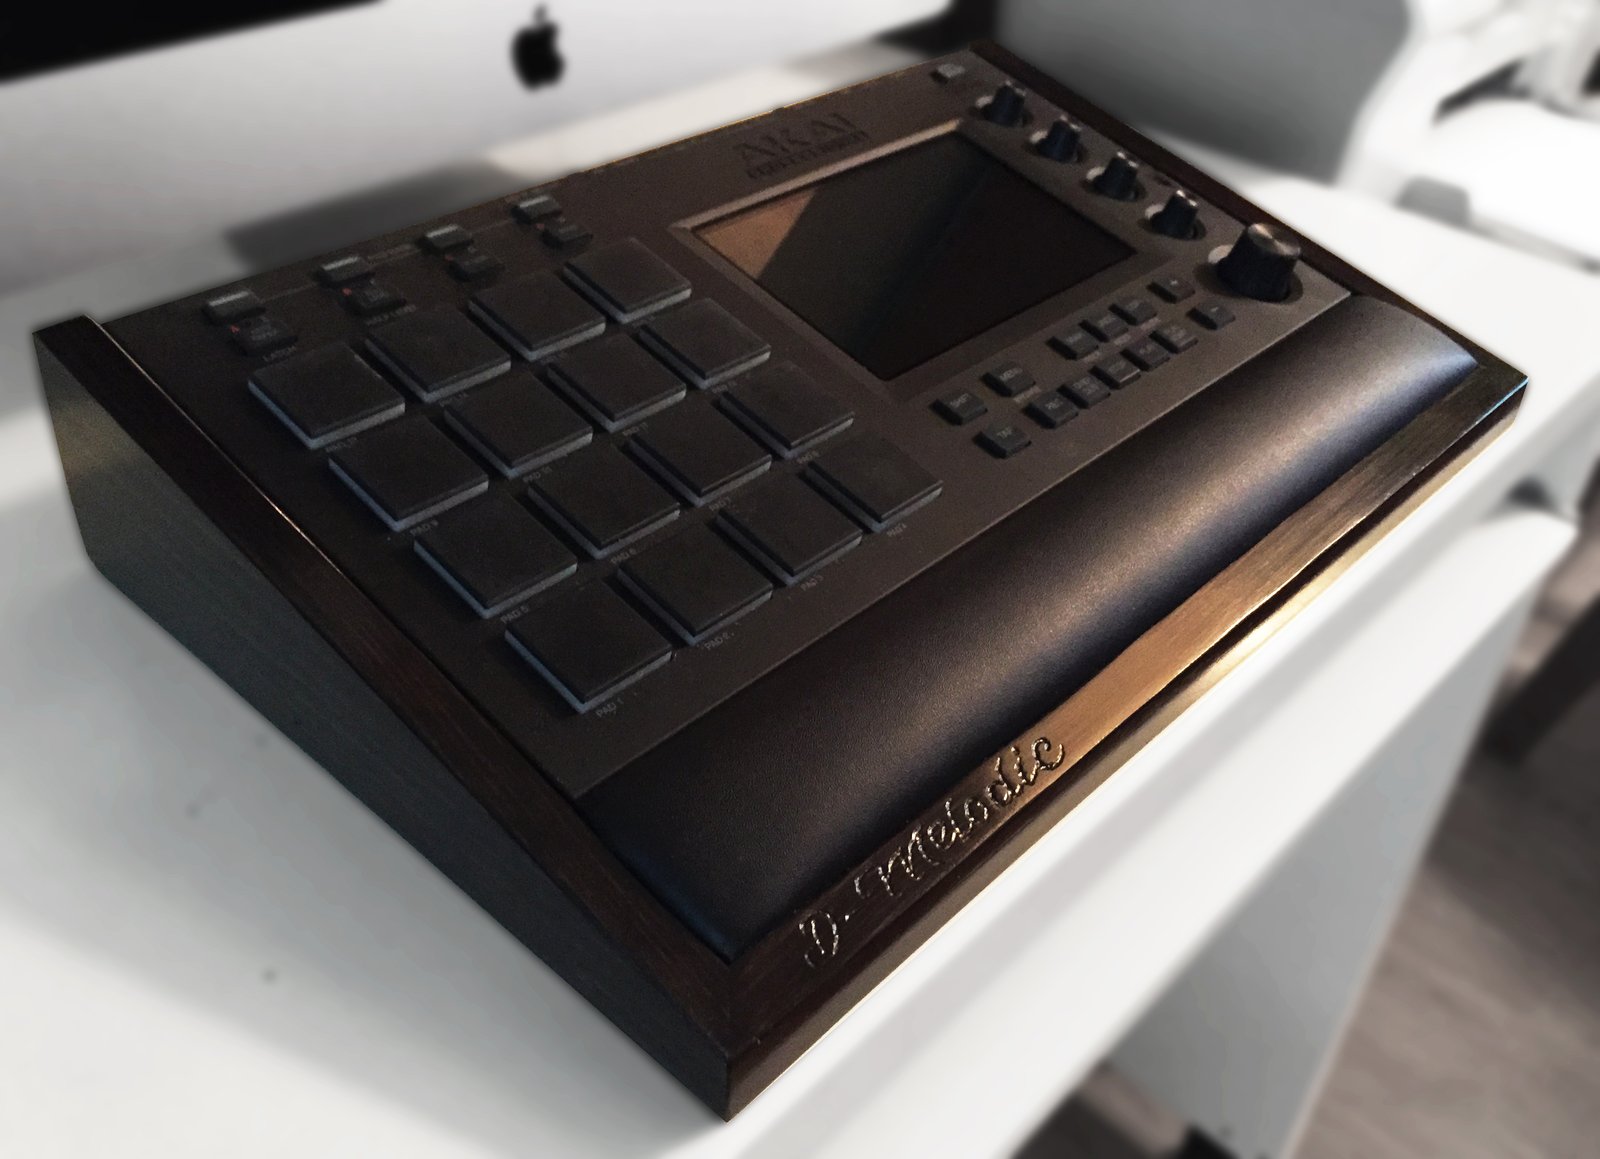 Akai MPC Touch Review: Hands On With The Touch UI & MPC Touch